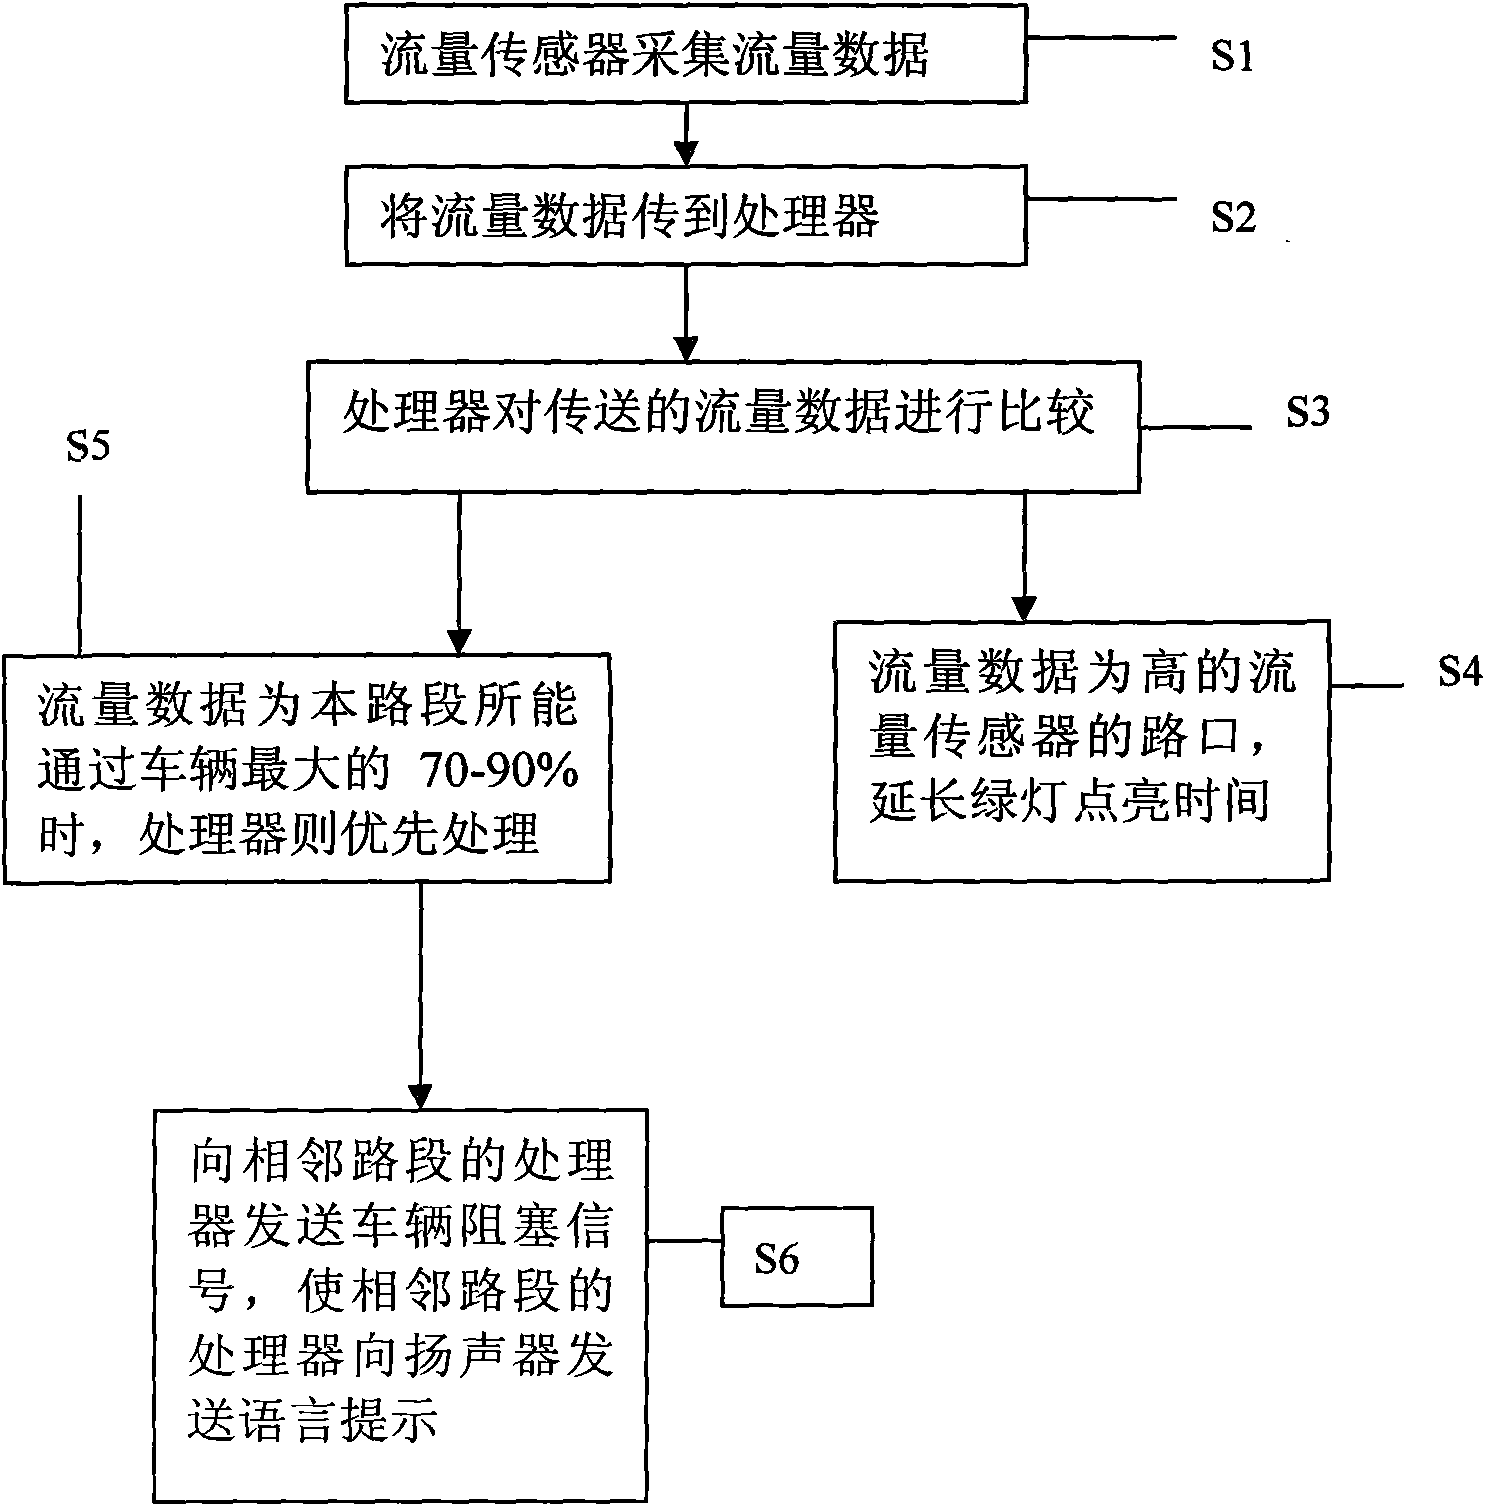 Method for intelligently adjusting and controlling traffic at crossings